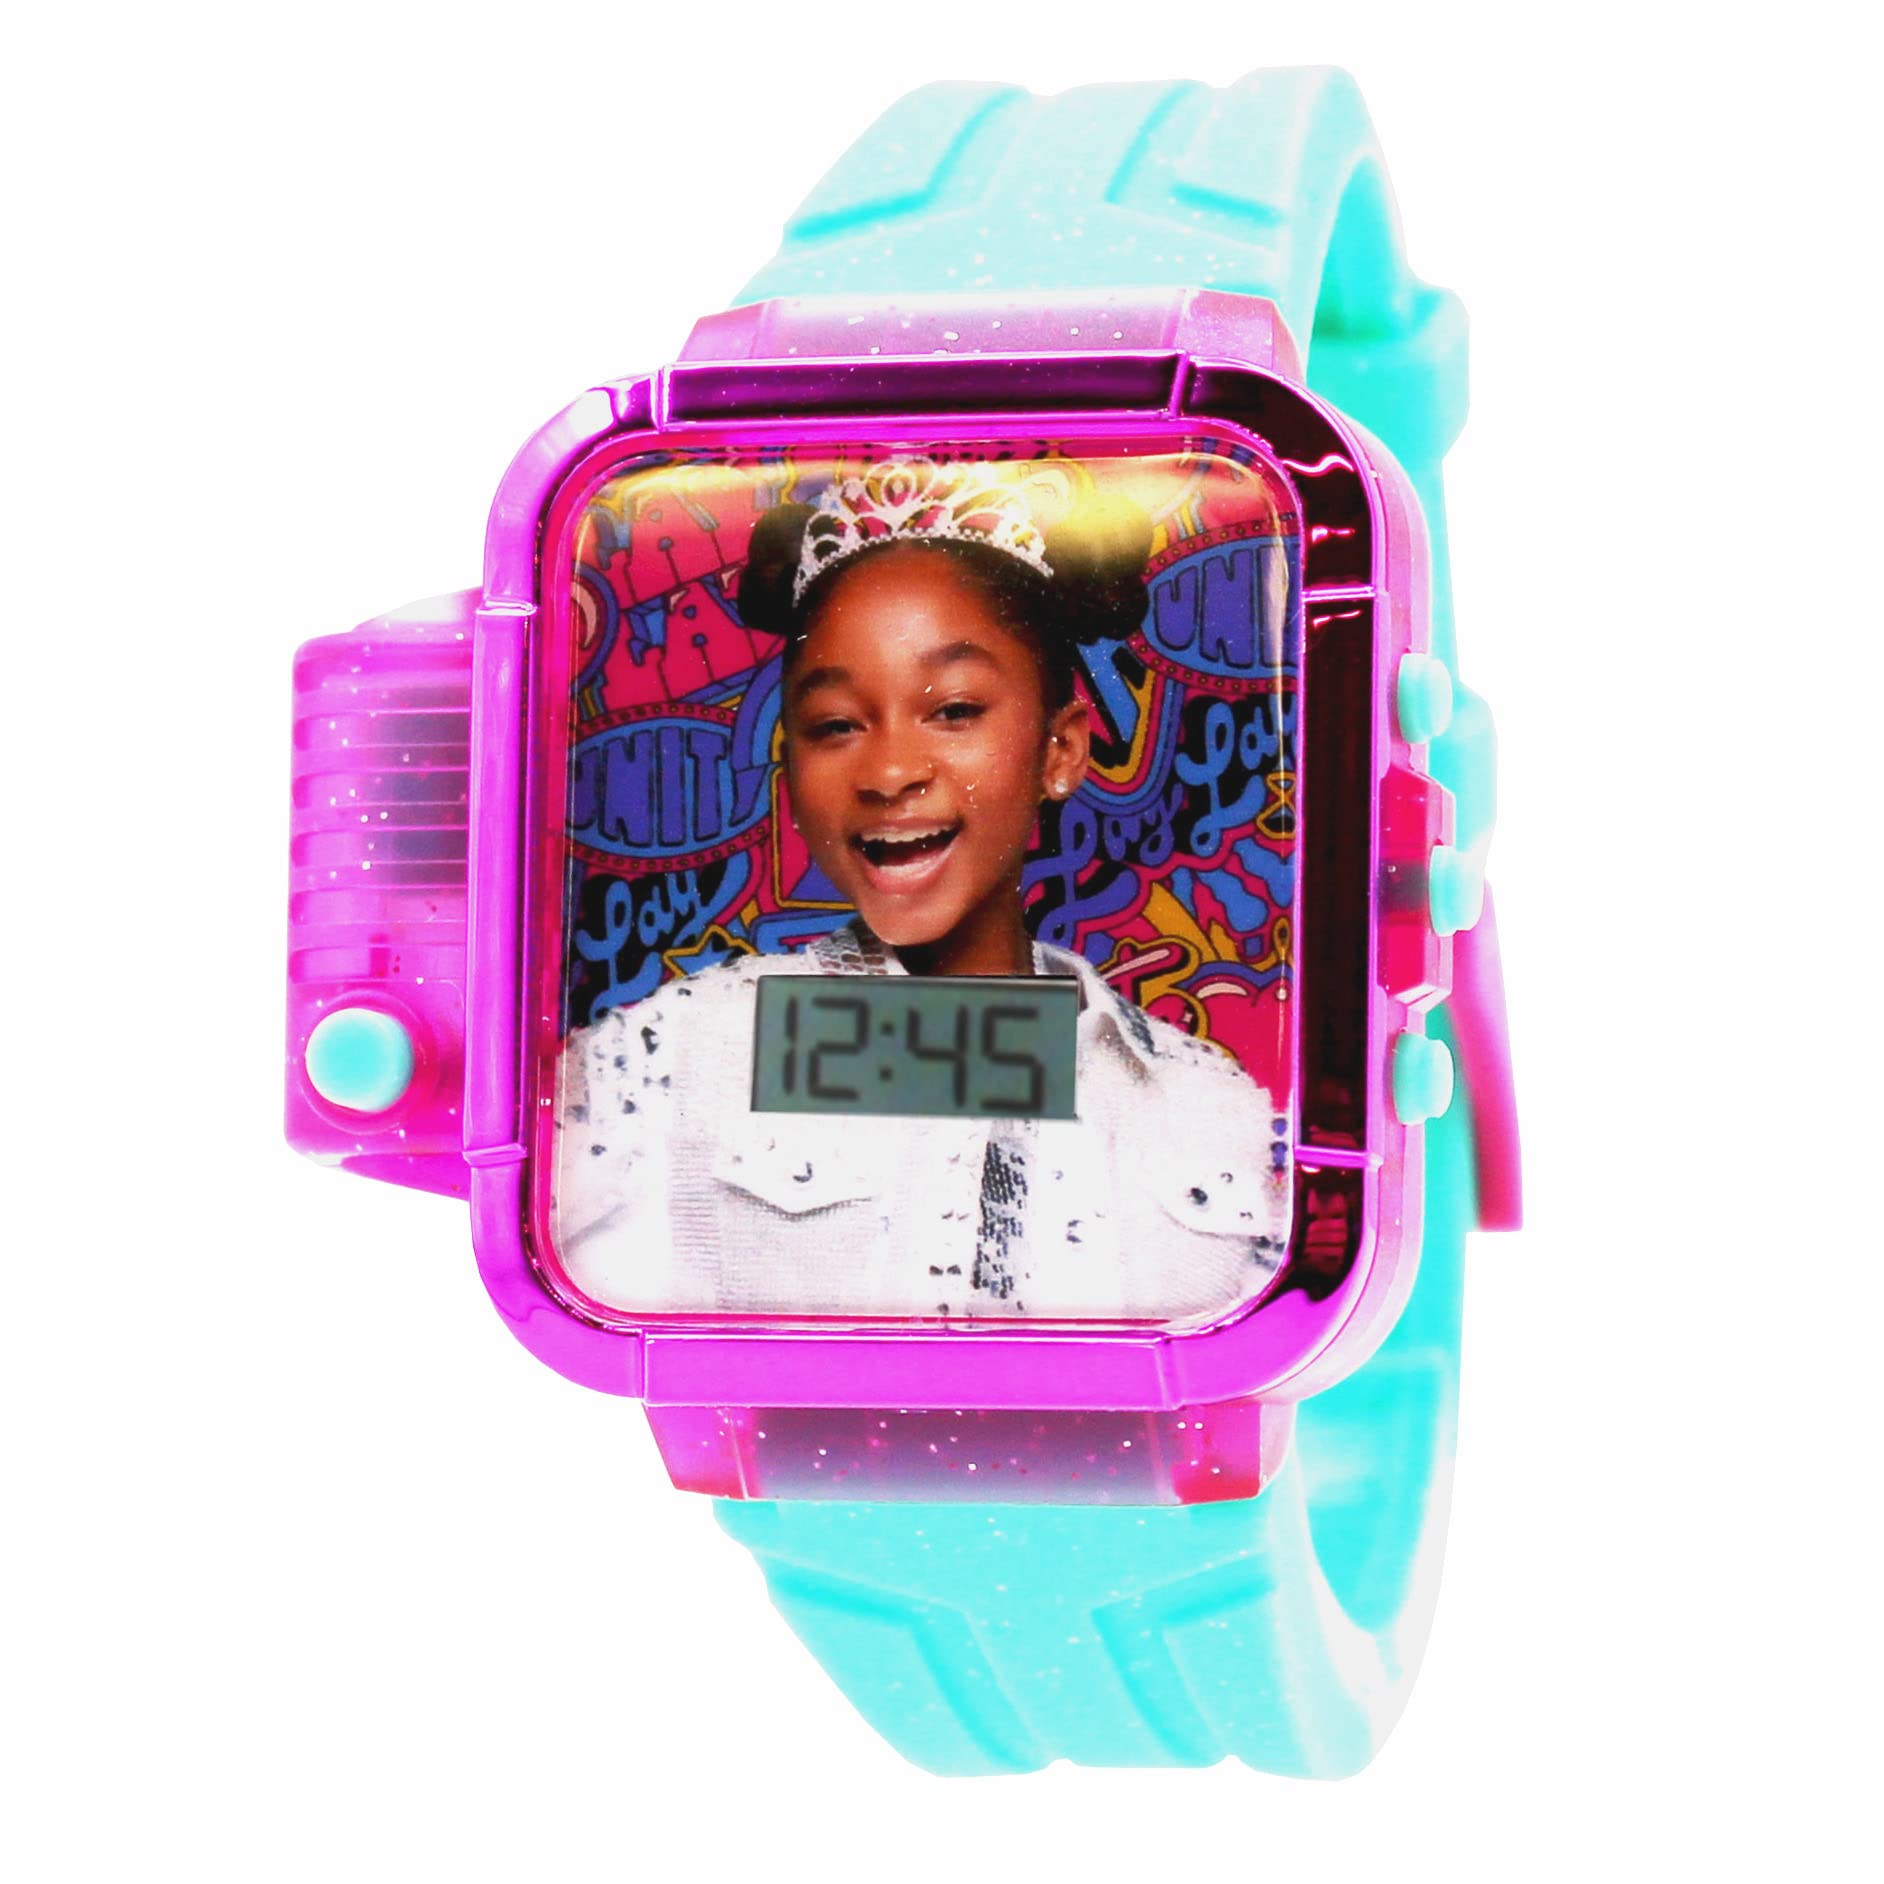 Accutime Kids Nickelodeon That Girl Lay Lay Hot Pink Digital LCD Quartz Wrist Watch with Flashlight, Turquoise Green Strap for Girls, Boys, Kids (Model: LAY4030AZ)